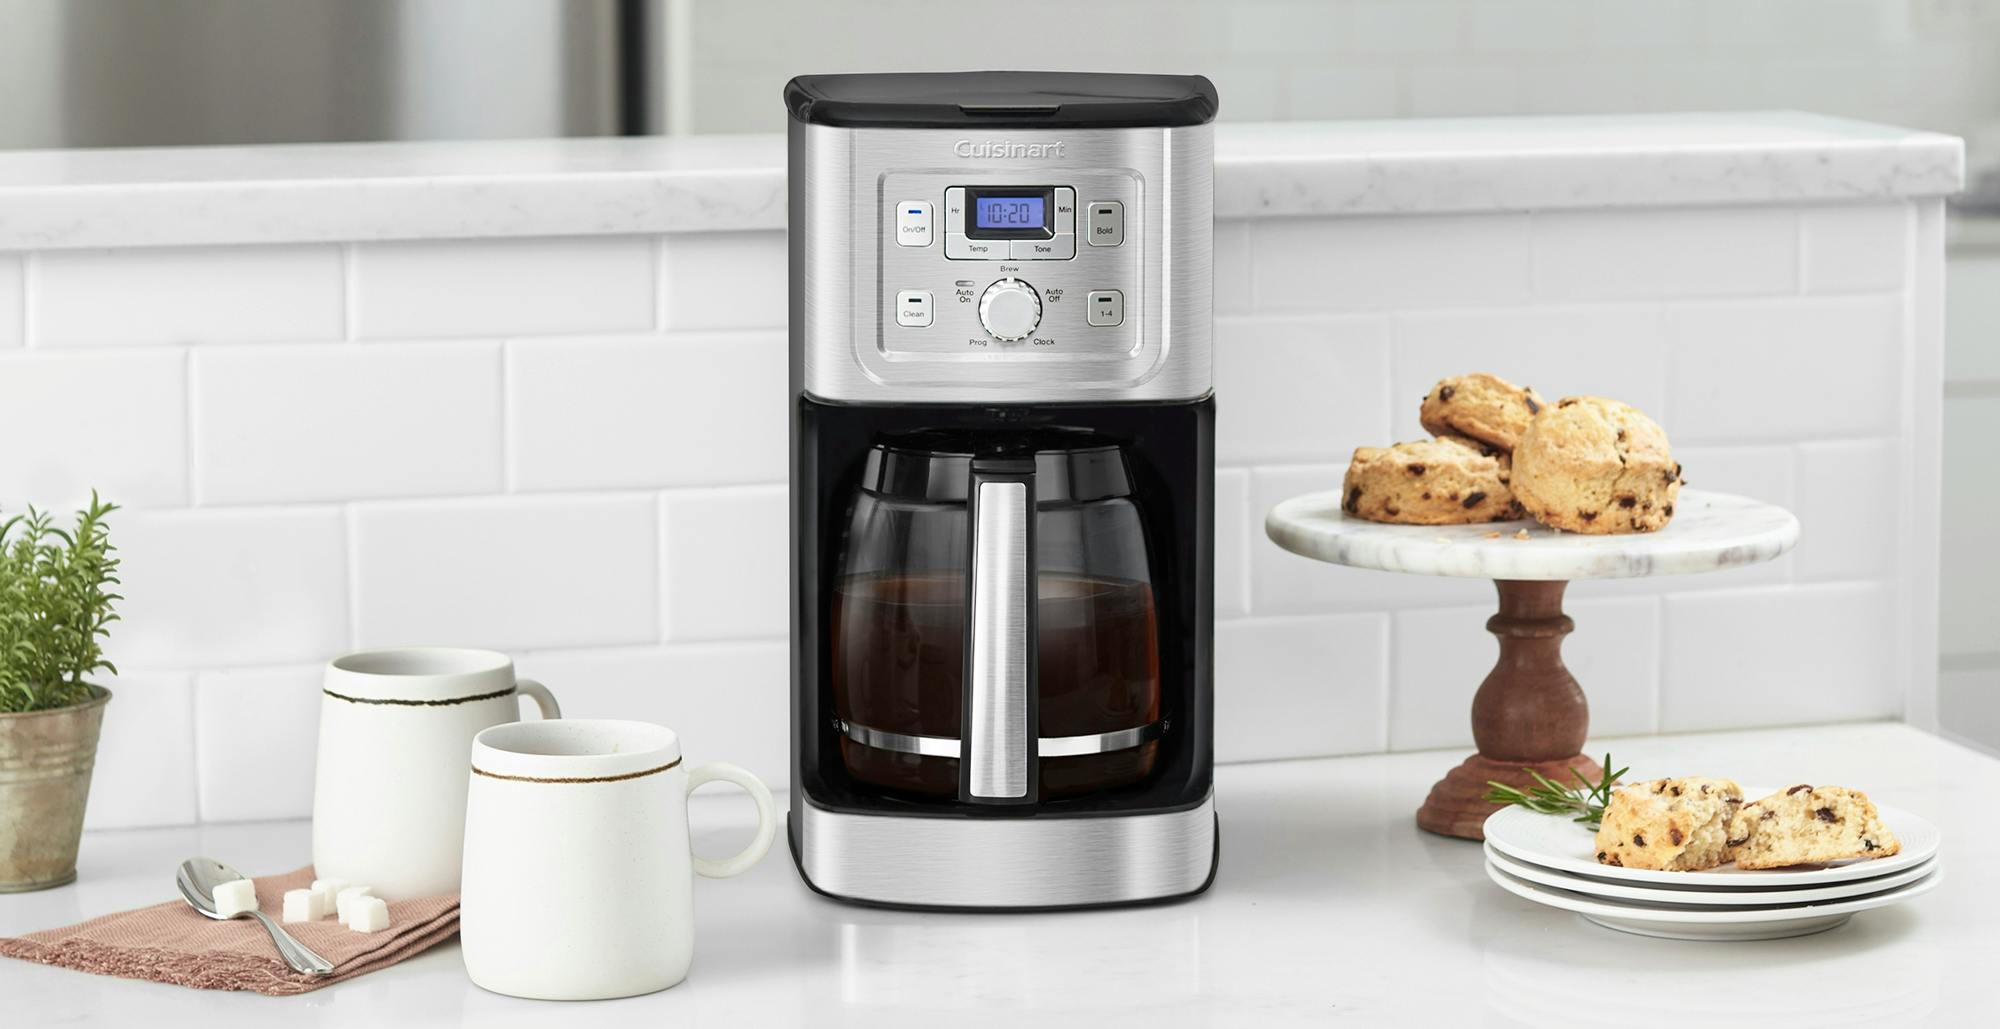 How to Clean Your Cuisinart Coffee Maker - The Krazy Coupon Lady